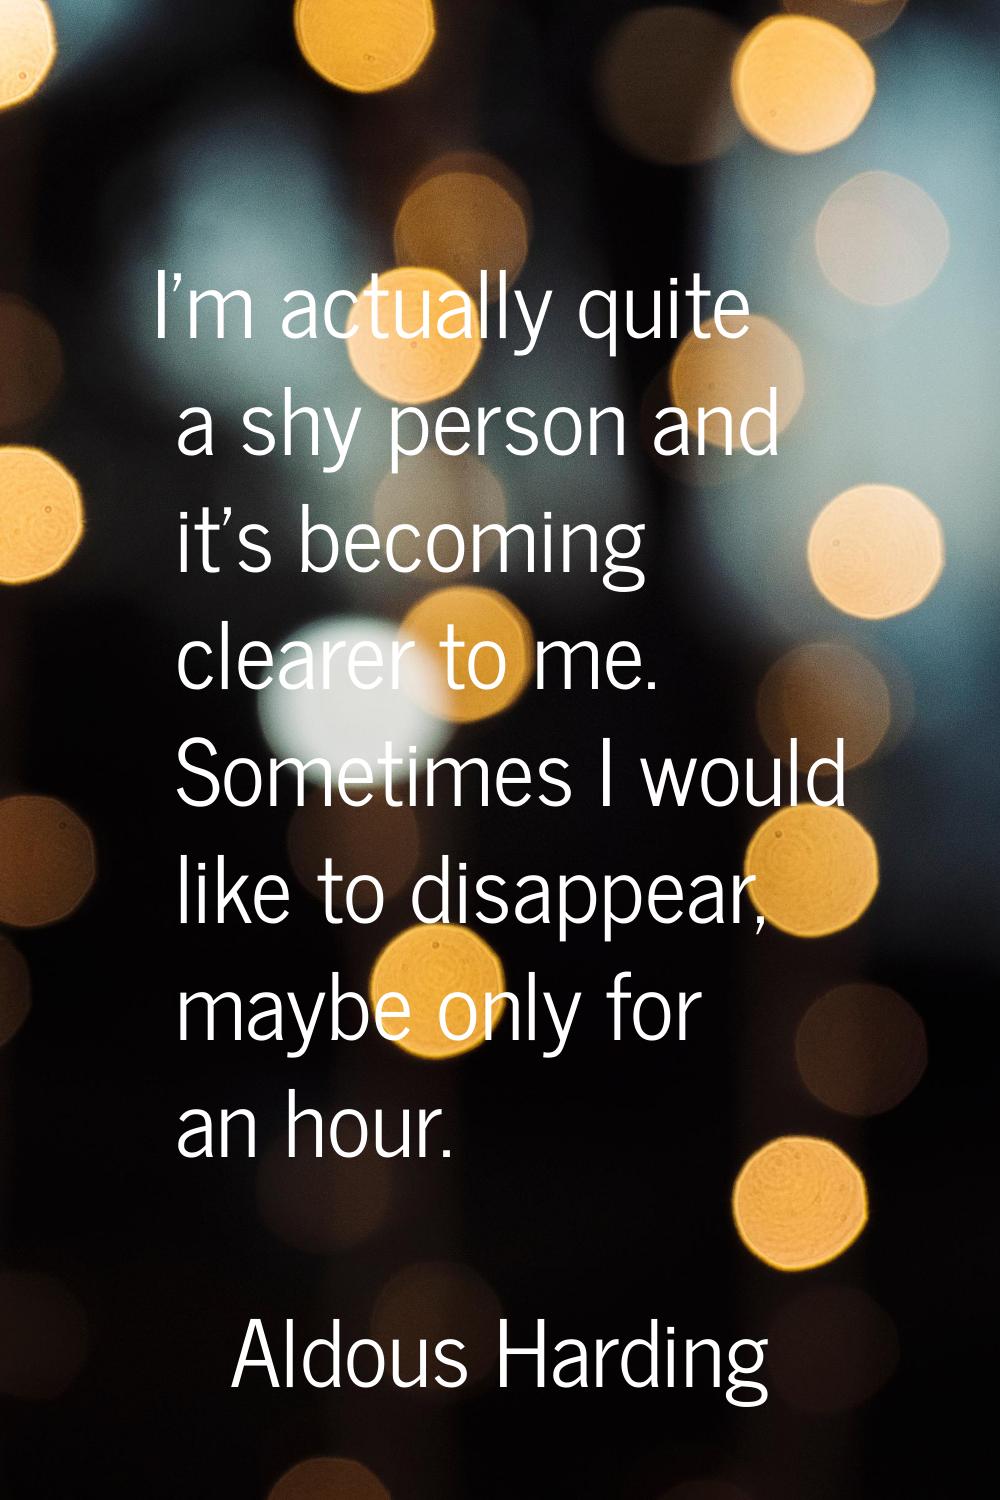 I'm actually quite a shy person and it's becoming clearer to me. Sometimes I would like to disappea